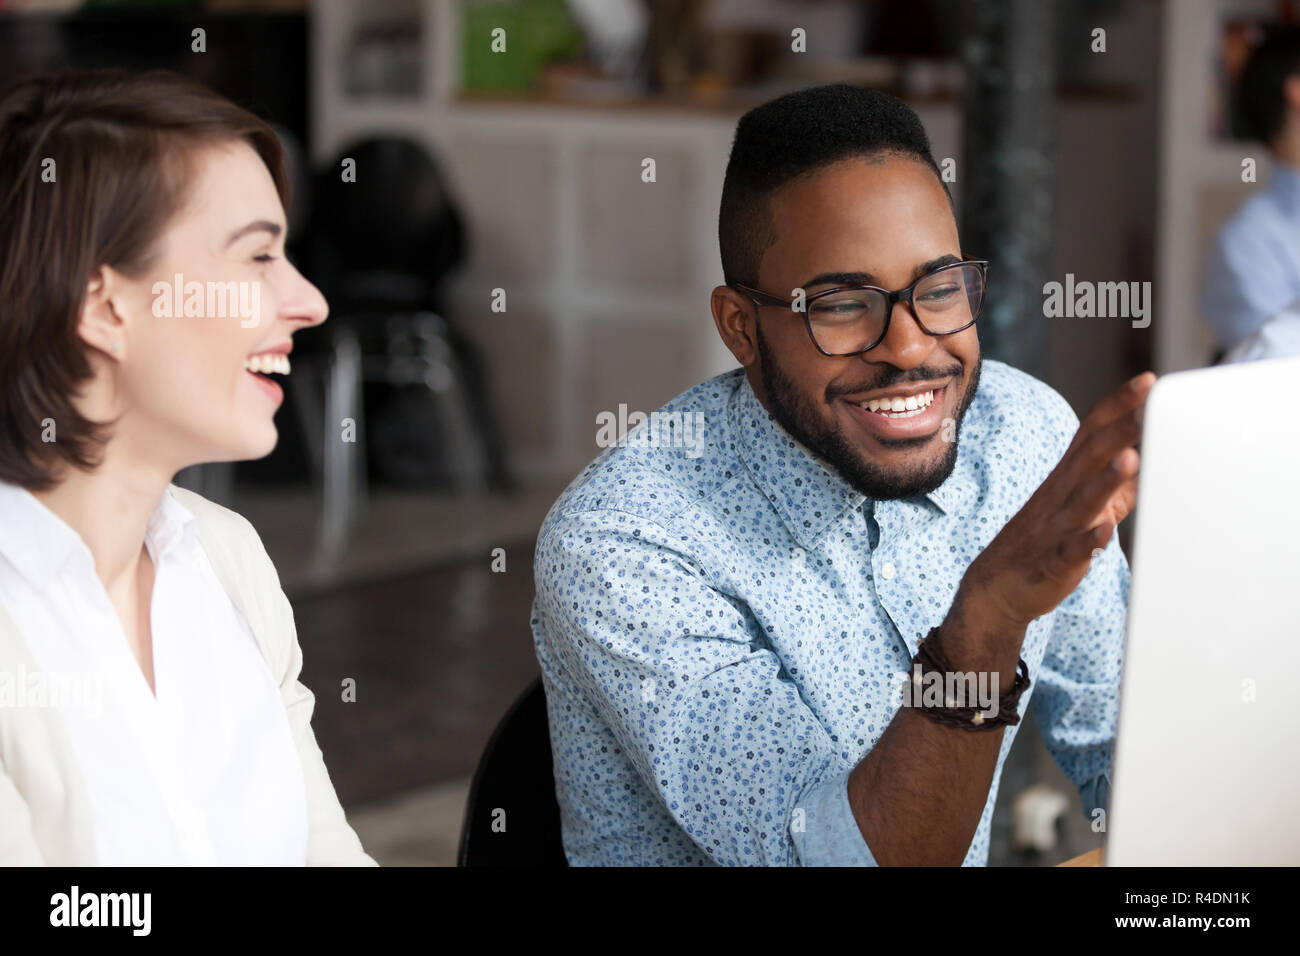 Smiling African American man talking with female colleague Stock Photo